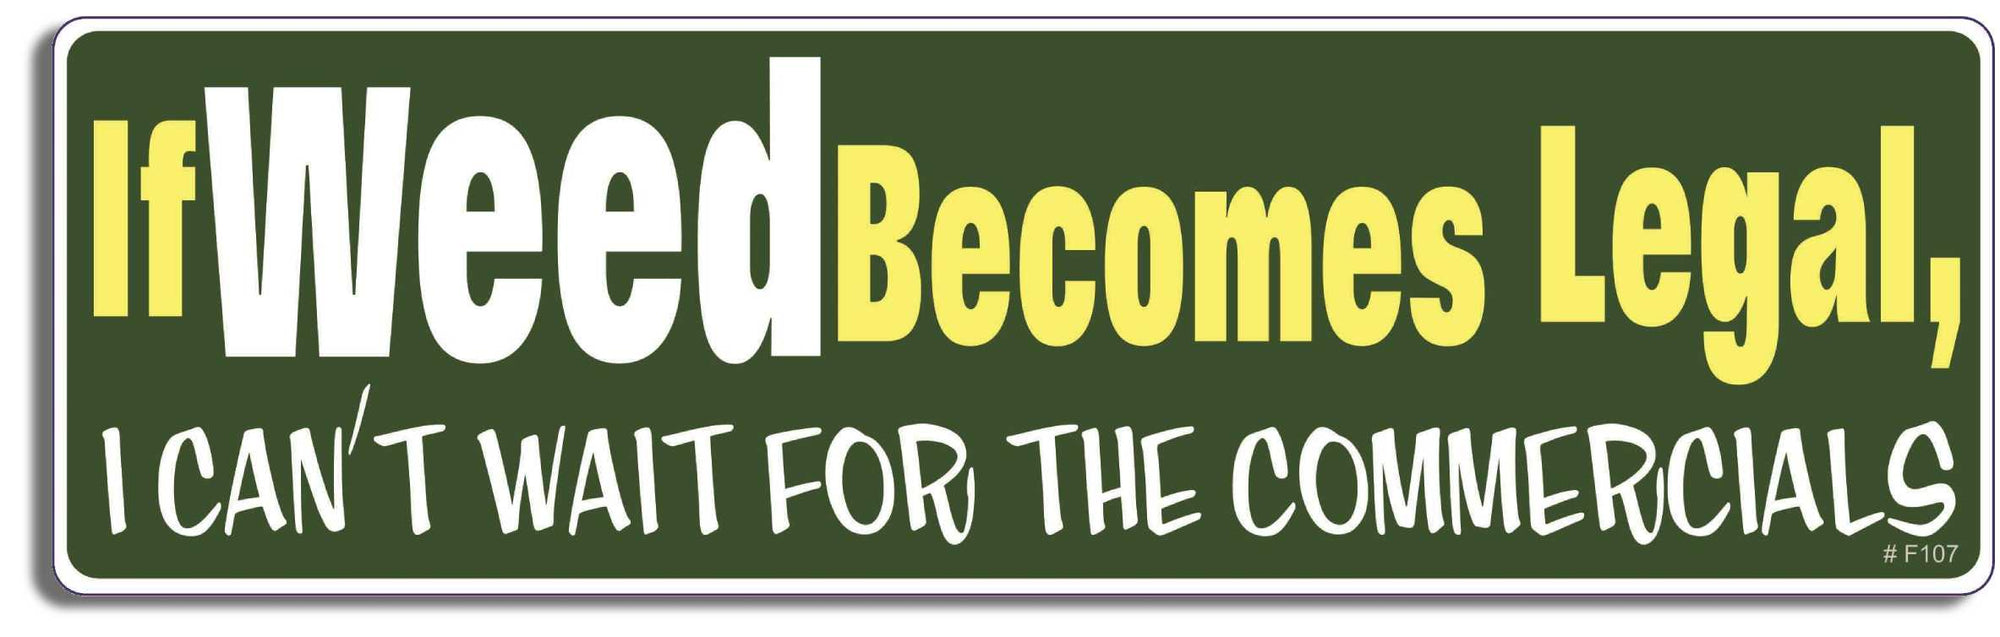 If weed becomes legal, I can't wait for the commercials - 3" x 10" Bumper Sticker--Car Magnet- -  Decal Bumper Sticker-funny Bumper Sticker Car Magnet If weed becomes legal, I can't wait-  Decal for cars funny, funny quote, funny saying, Pot